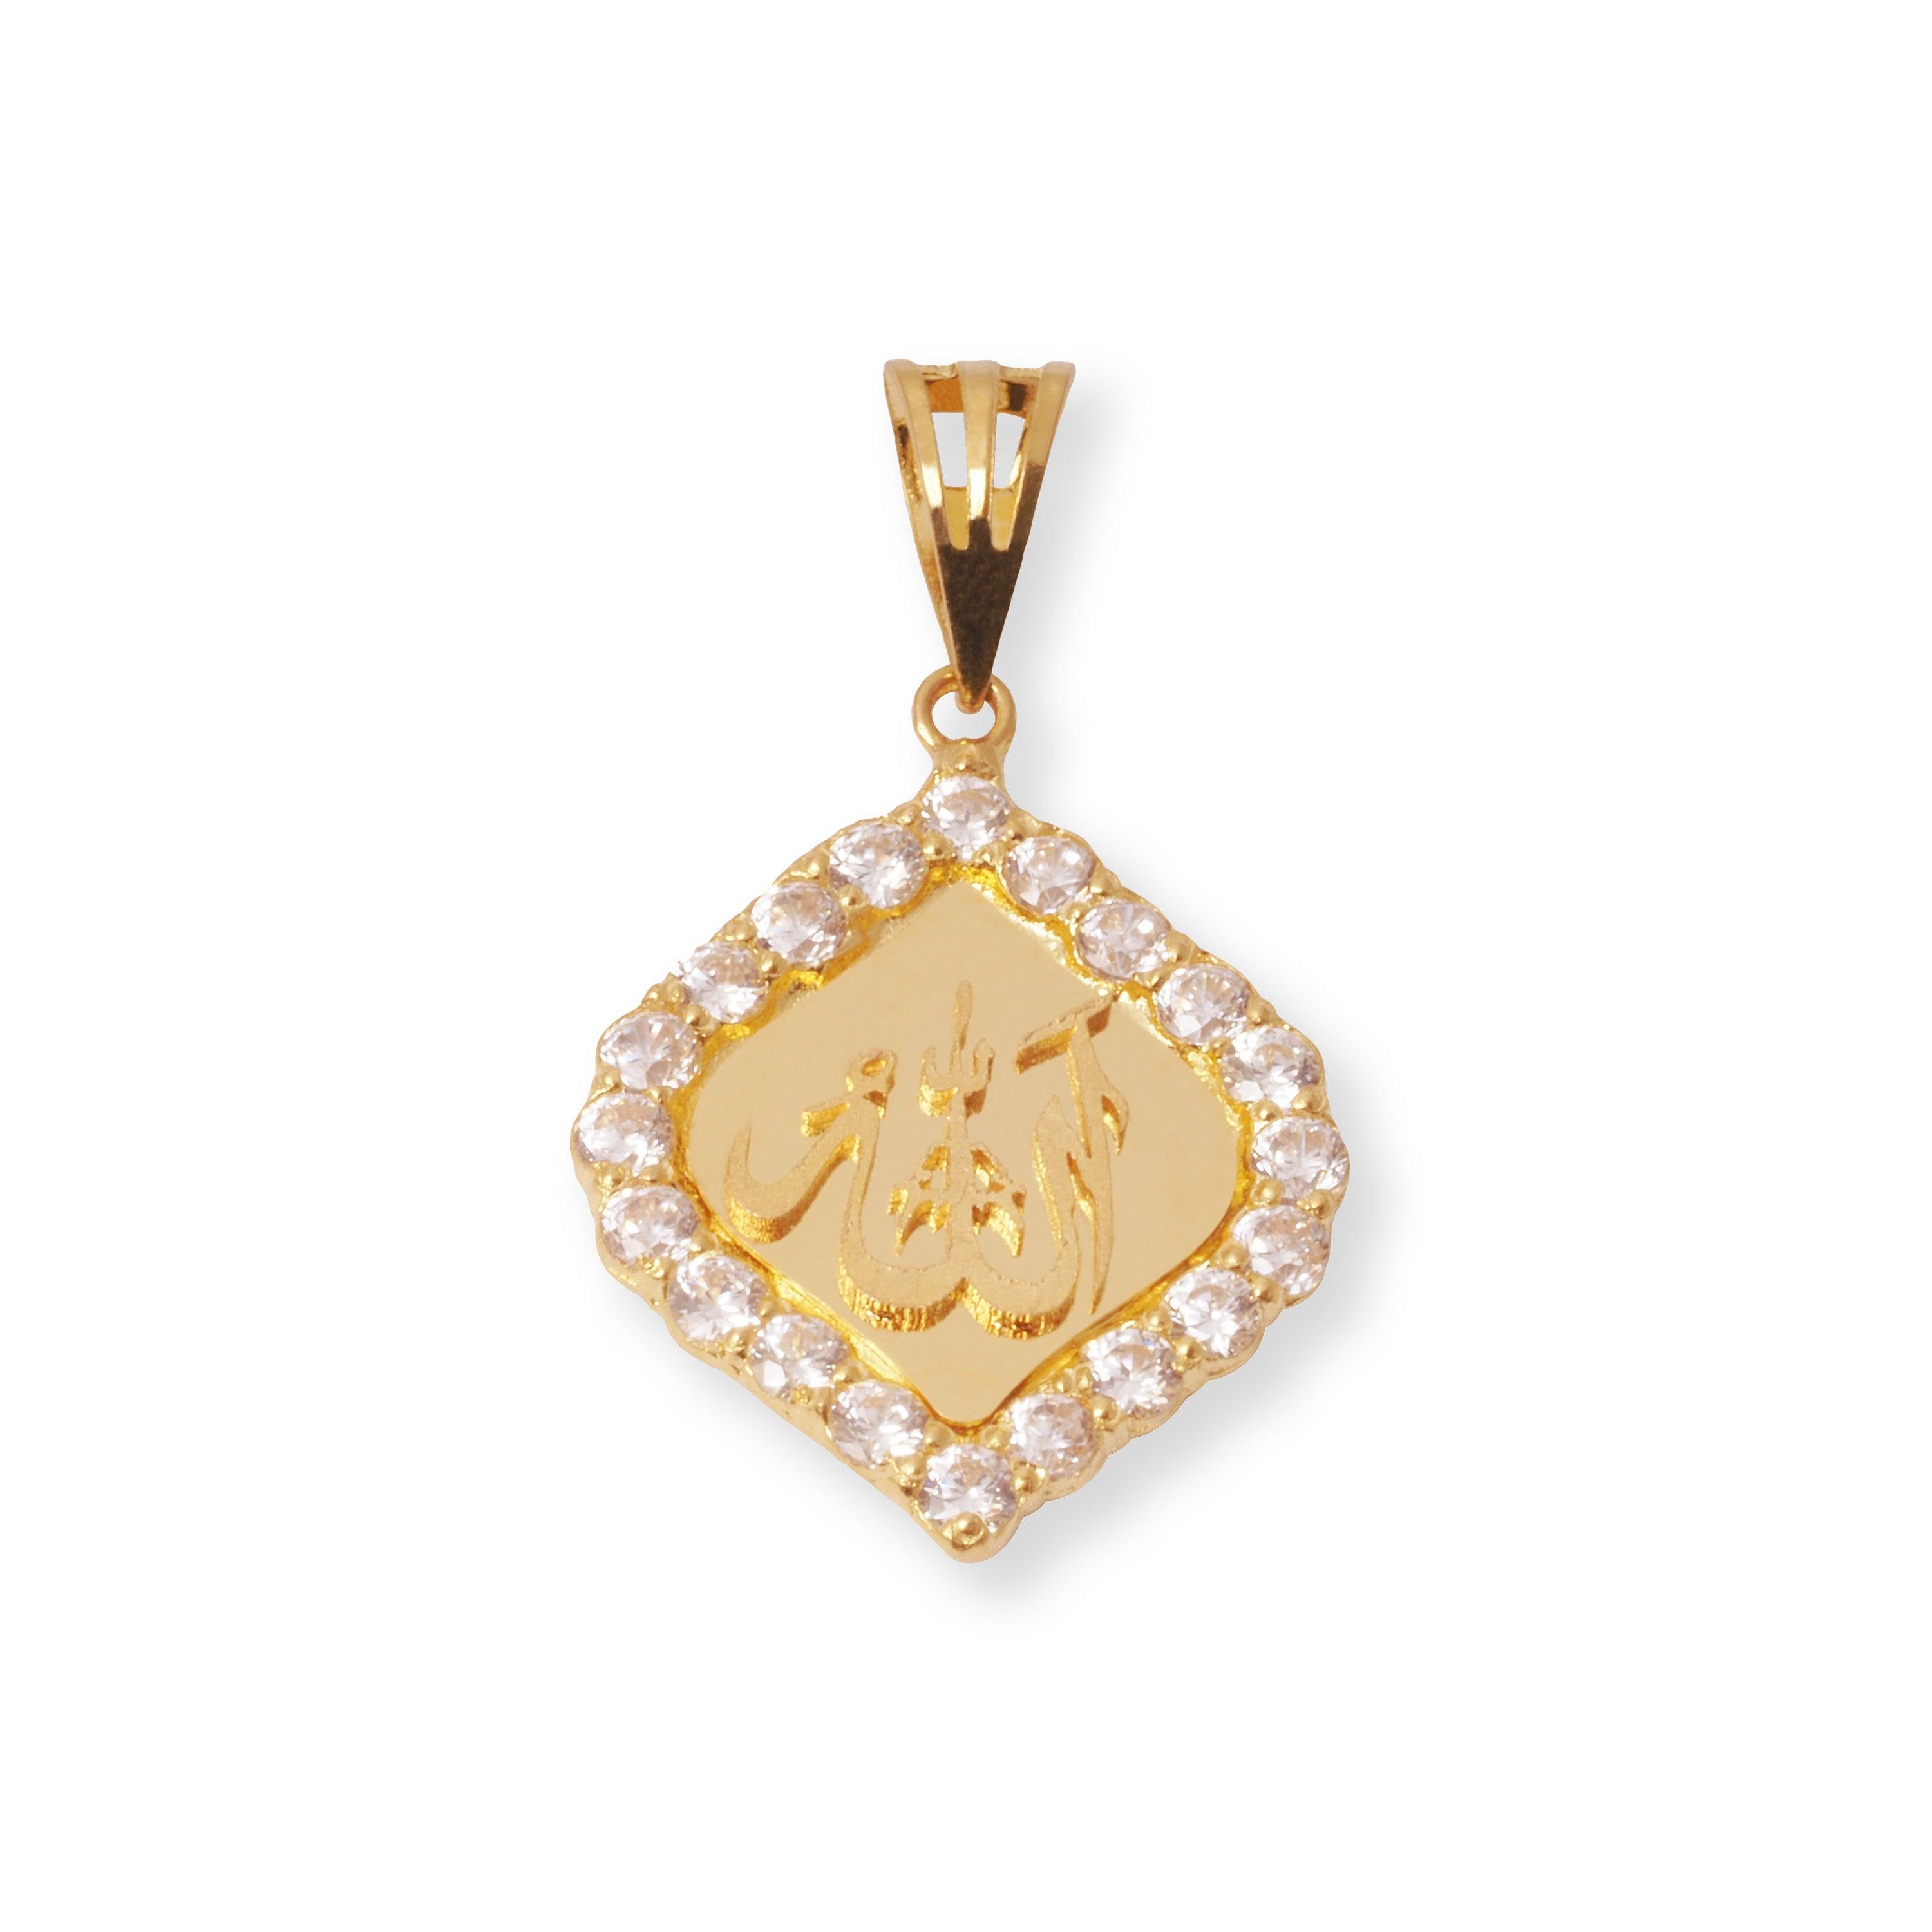 22ct Yellow Gold Allah Pendant with Cubic Zirconia P-7987A - Minar Jewellers